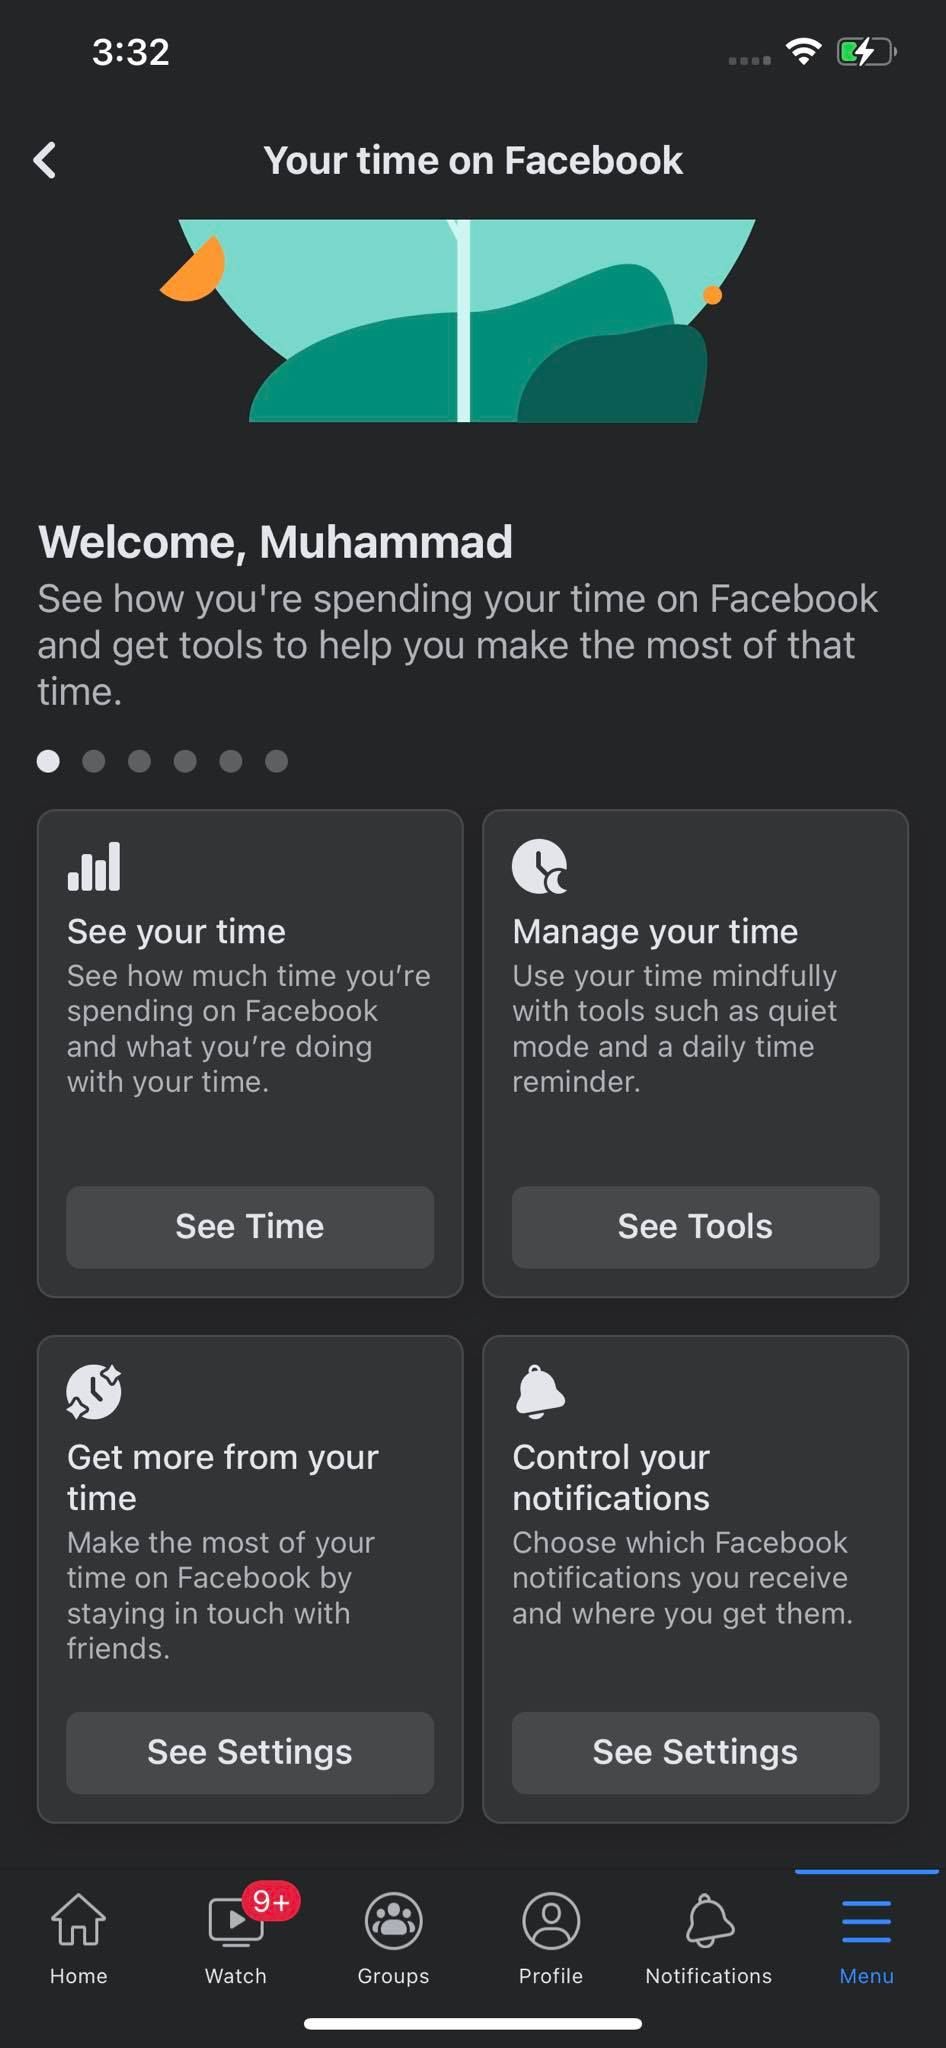 Manage Your Time Option in Facebook's Your Time on Facebook Settings